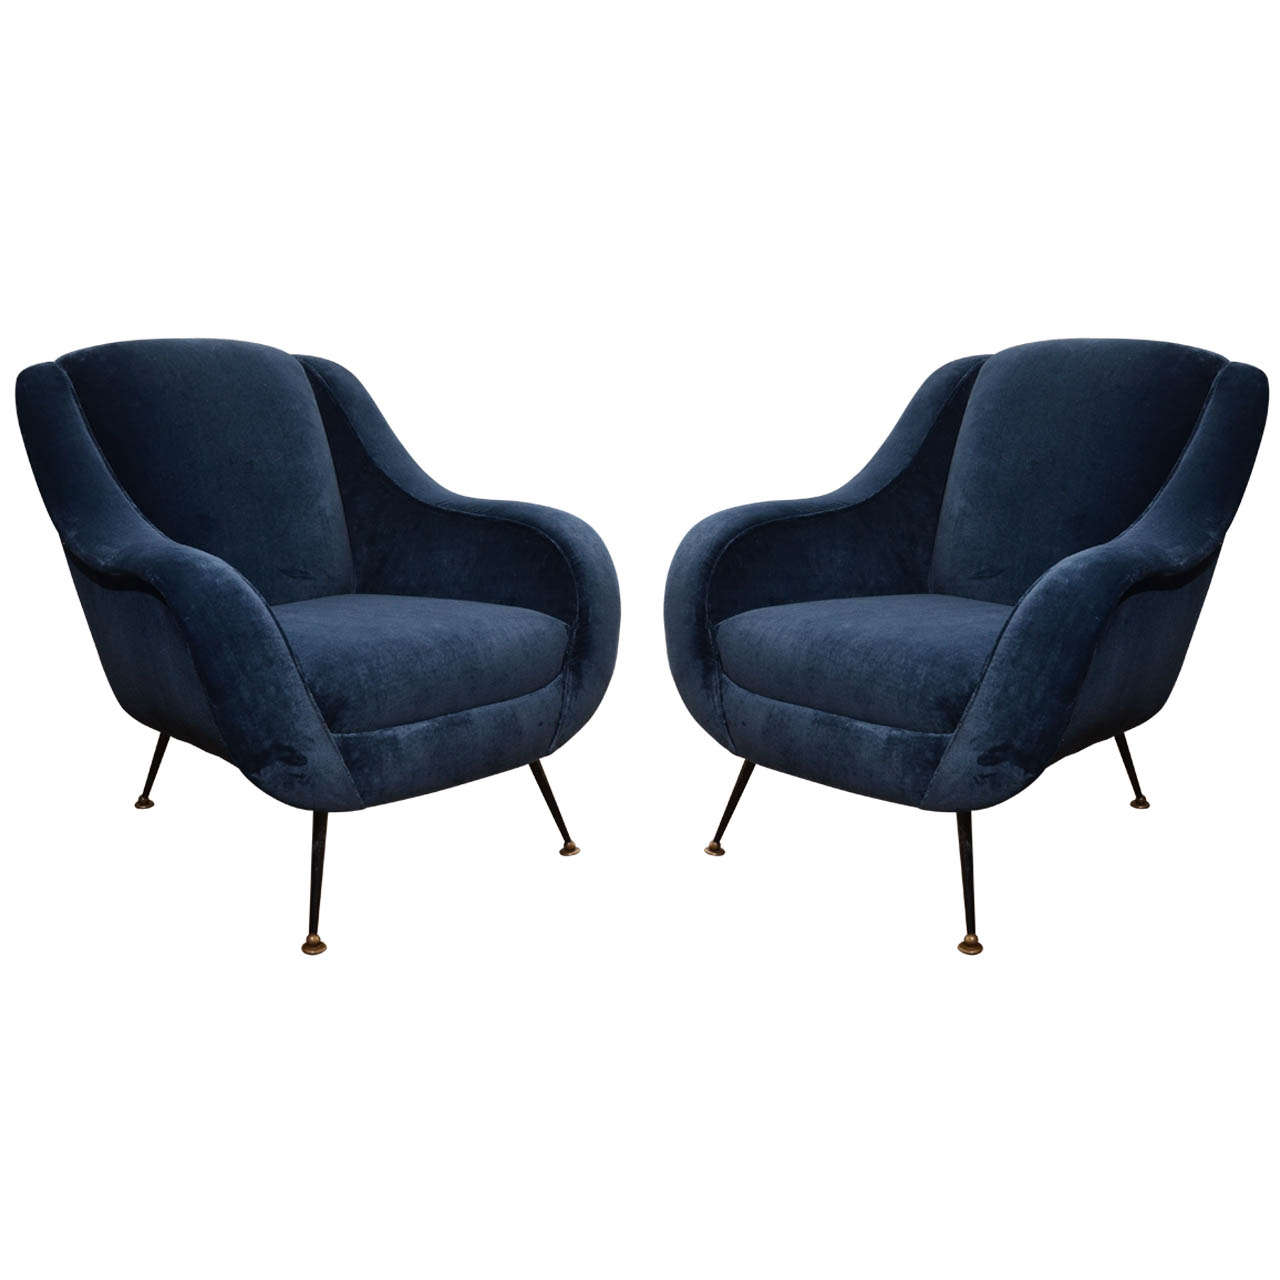 Pair of 1950's Italian Club Chairs in the style of Marco Zanuso